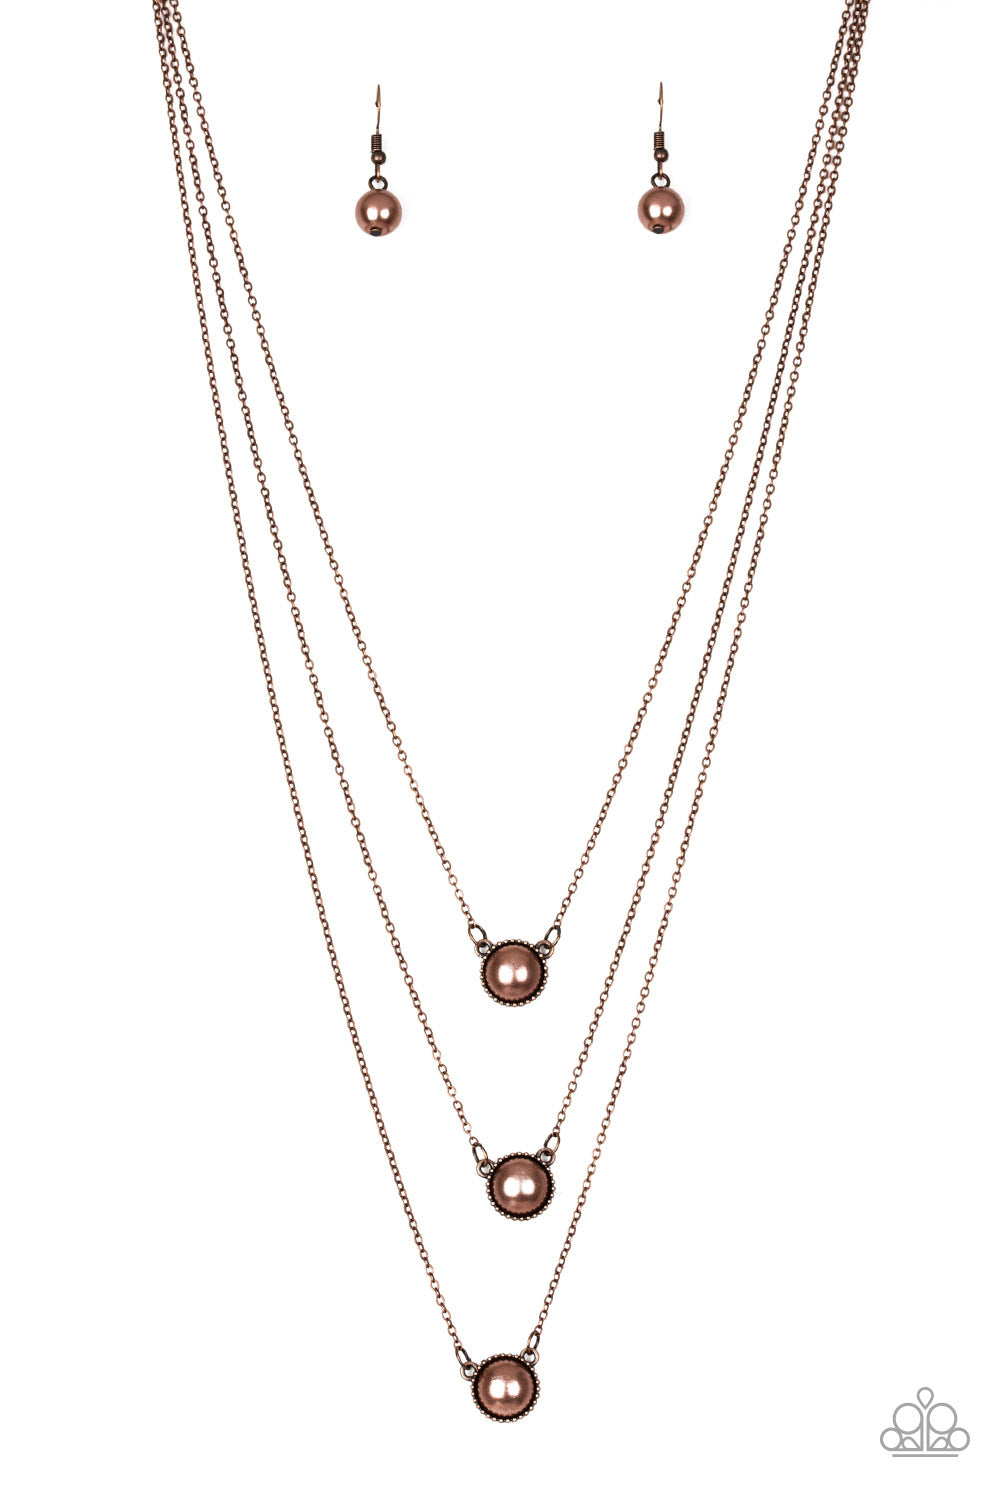 A Love For Luster - Copper Necklace Set